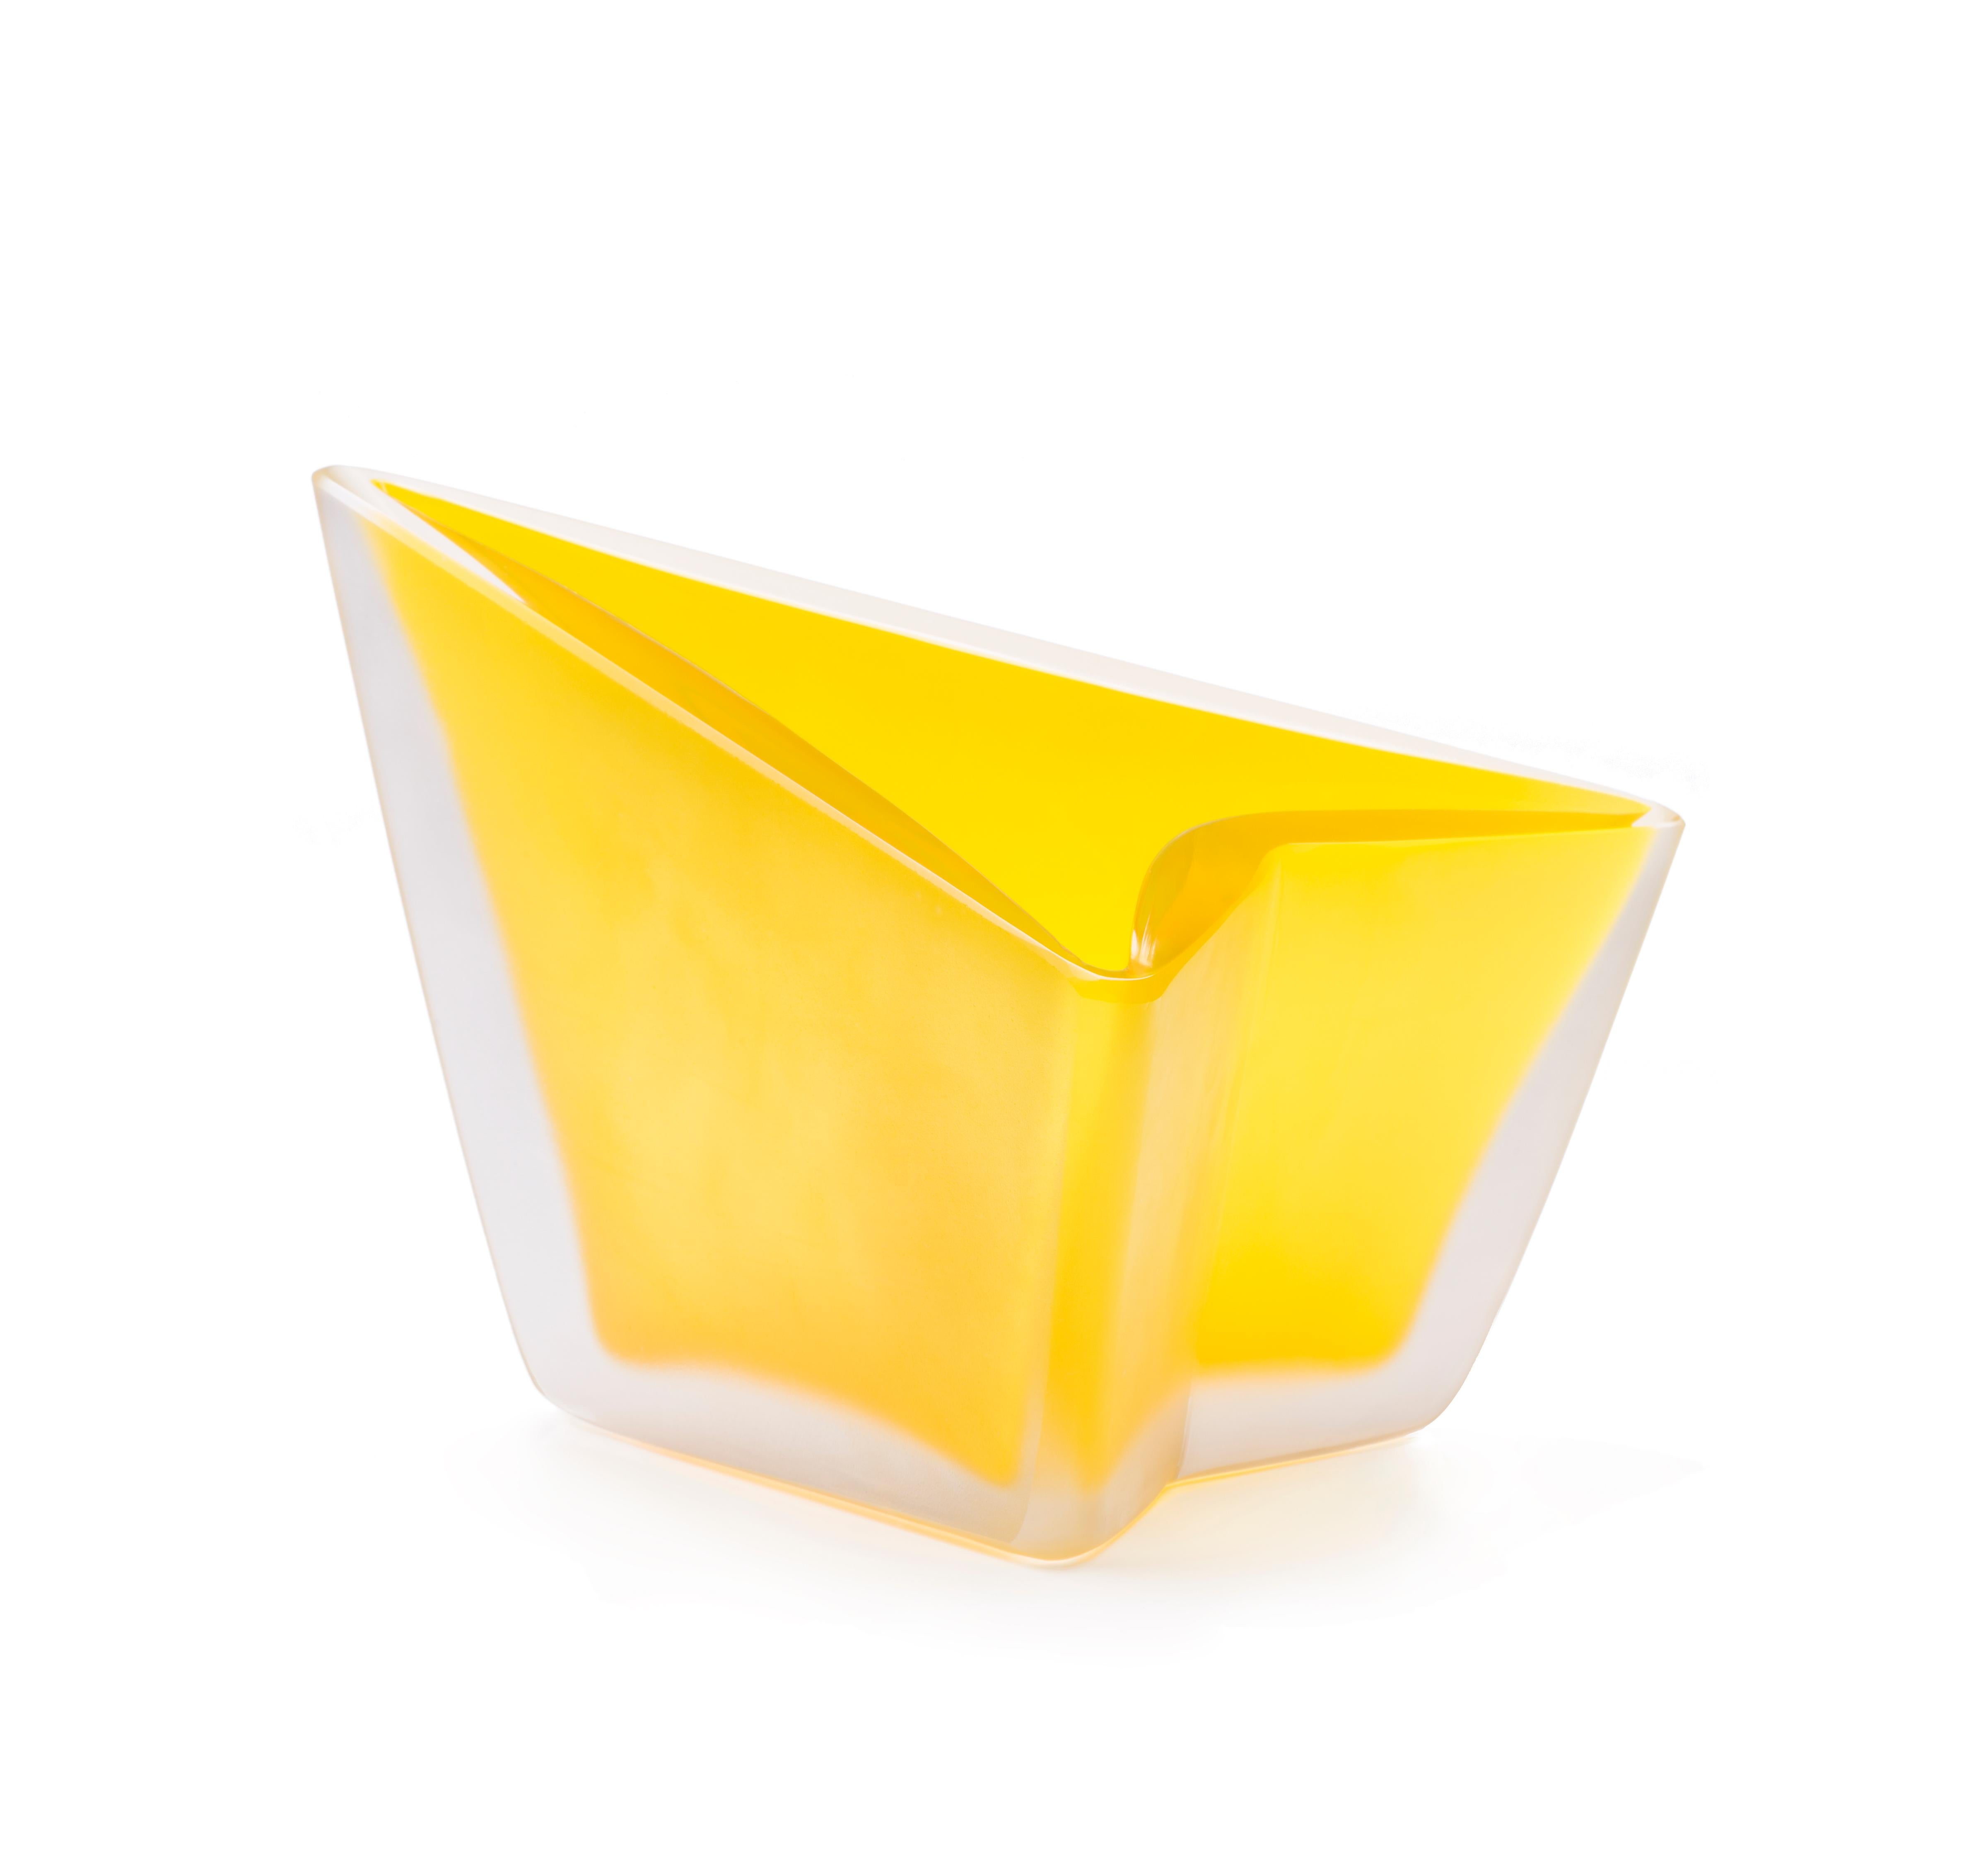 Freccia small yellow vase by Purho
Dimensions: D25 x W21 x H16 cm
Materials: glass
Other colours and dimensions are available. 

Purho is a new protagonist of made in Italy design, a work of synthesis, a research that has lasted for years, an